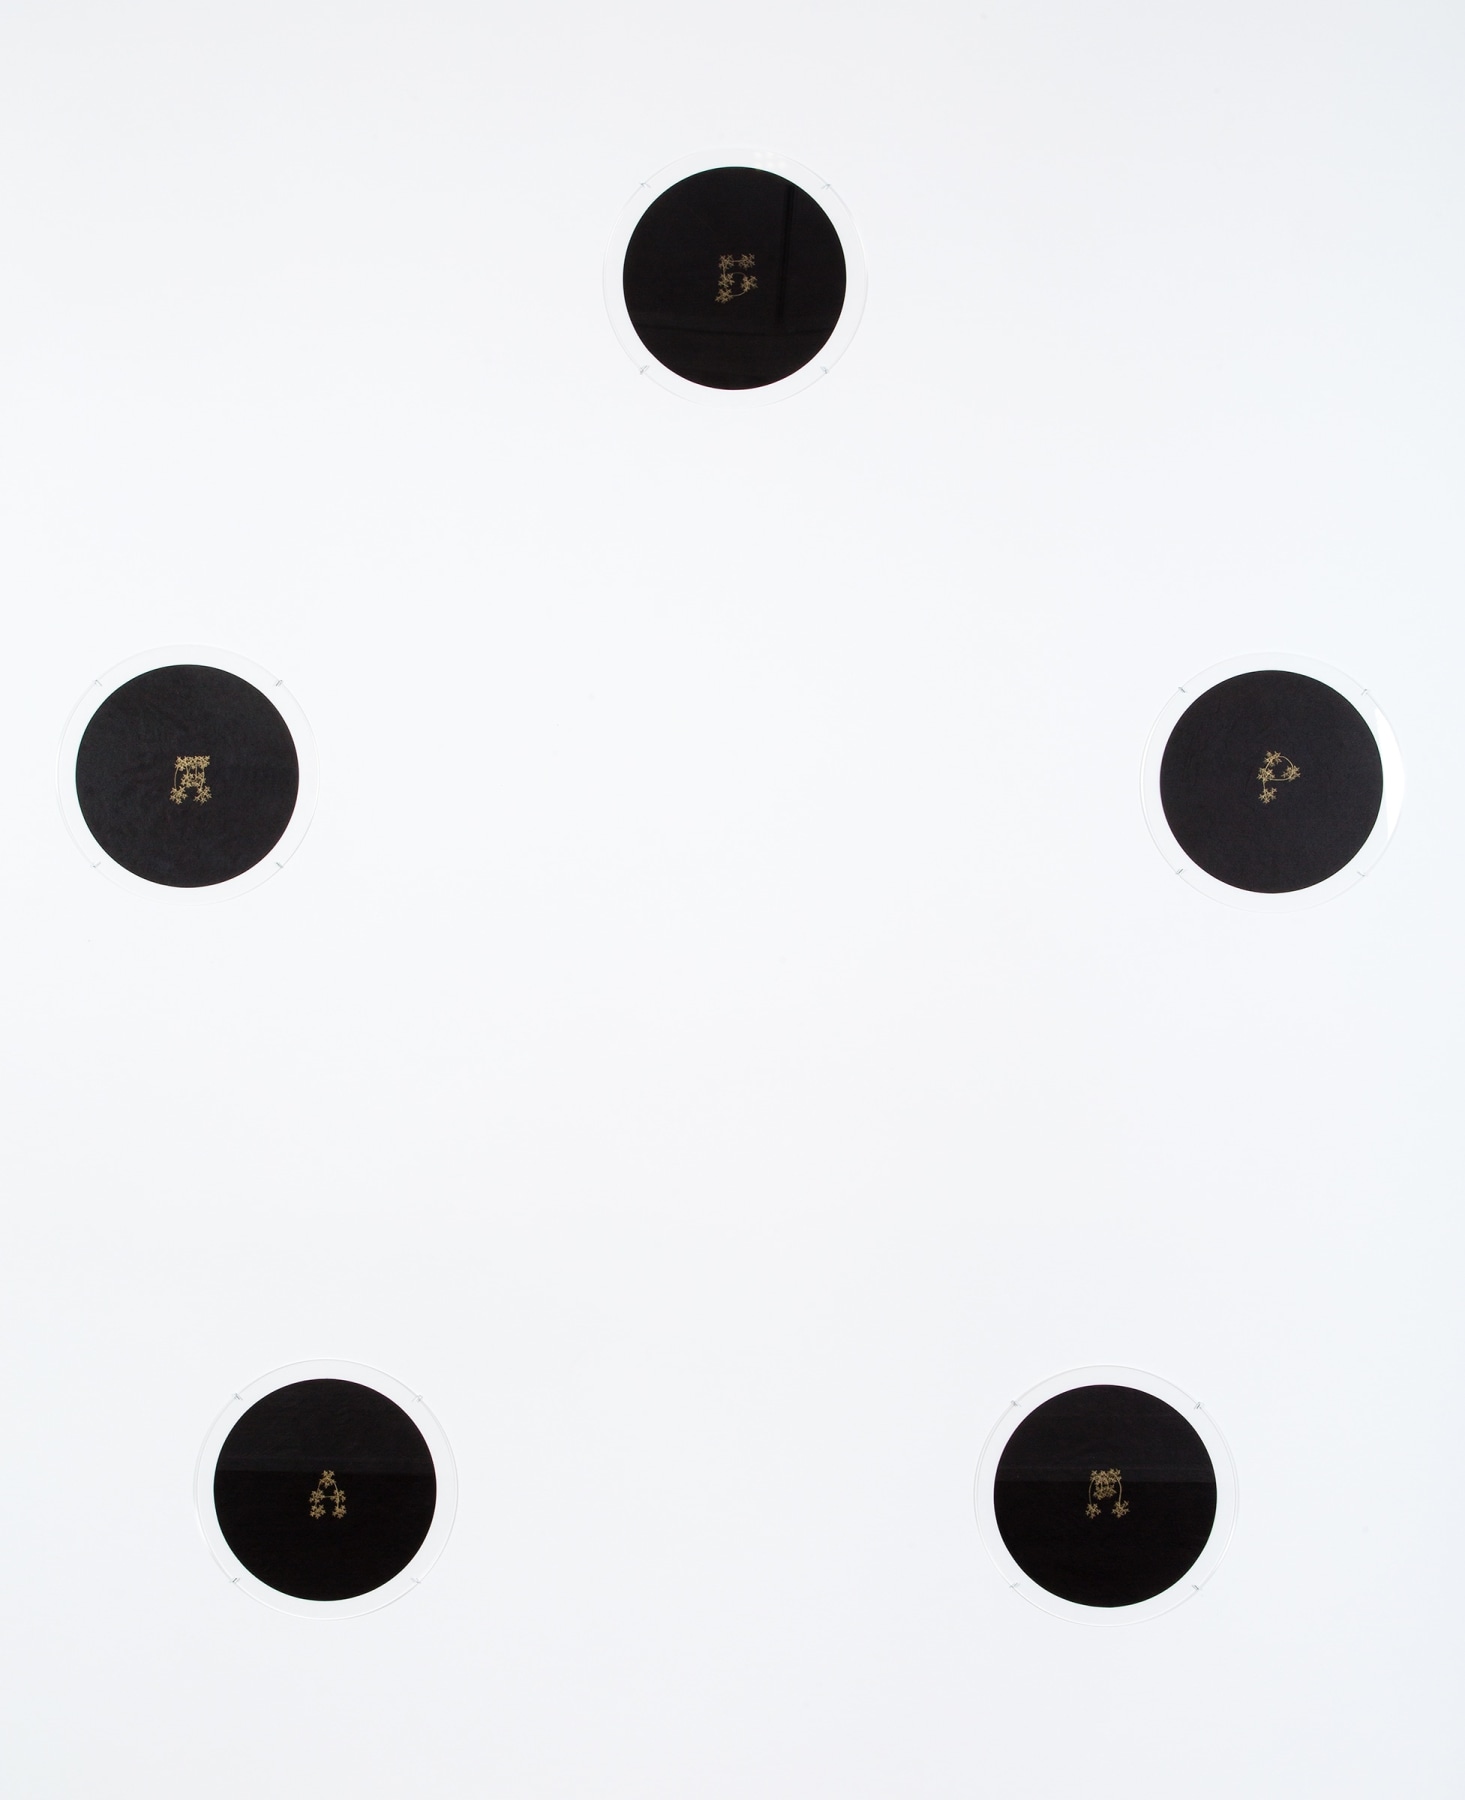 James Lee Byars

&amp;ldquo;5 Points Makes a Man&amp;rdquo;, 1993

Gold pencil on Japanese paper

Five parts, each:

11 3/4 x 11 3/4 inches

30 x 30 cm

JBZ 193

$125,000